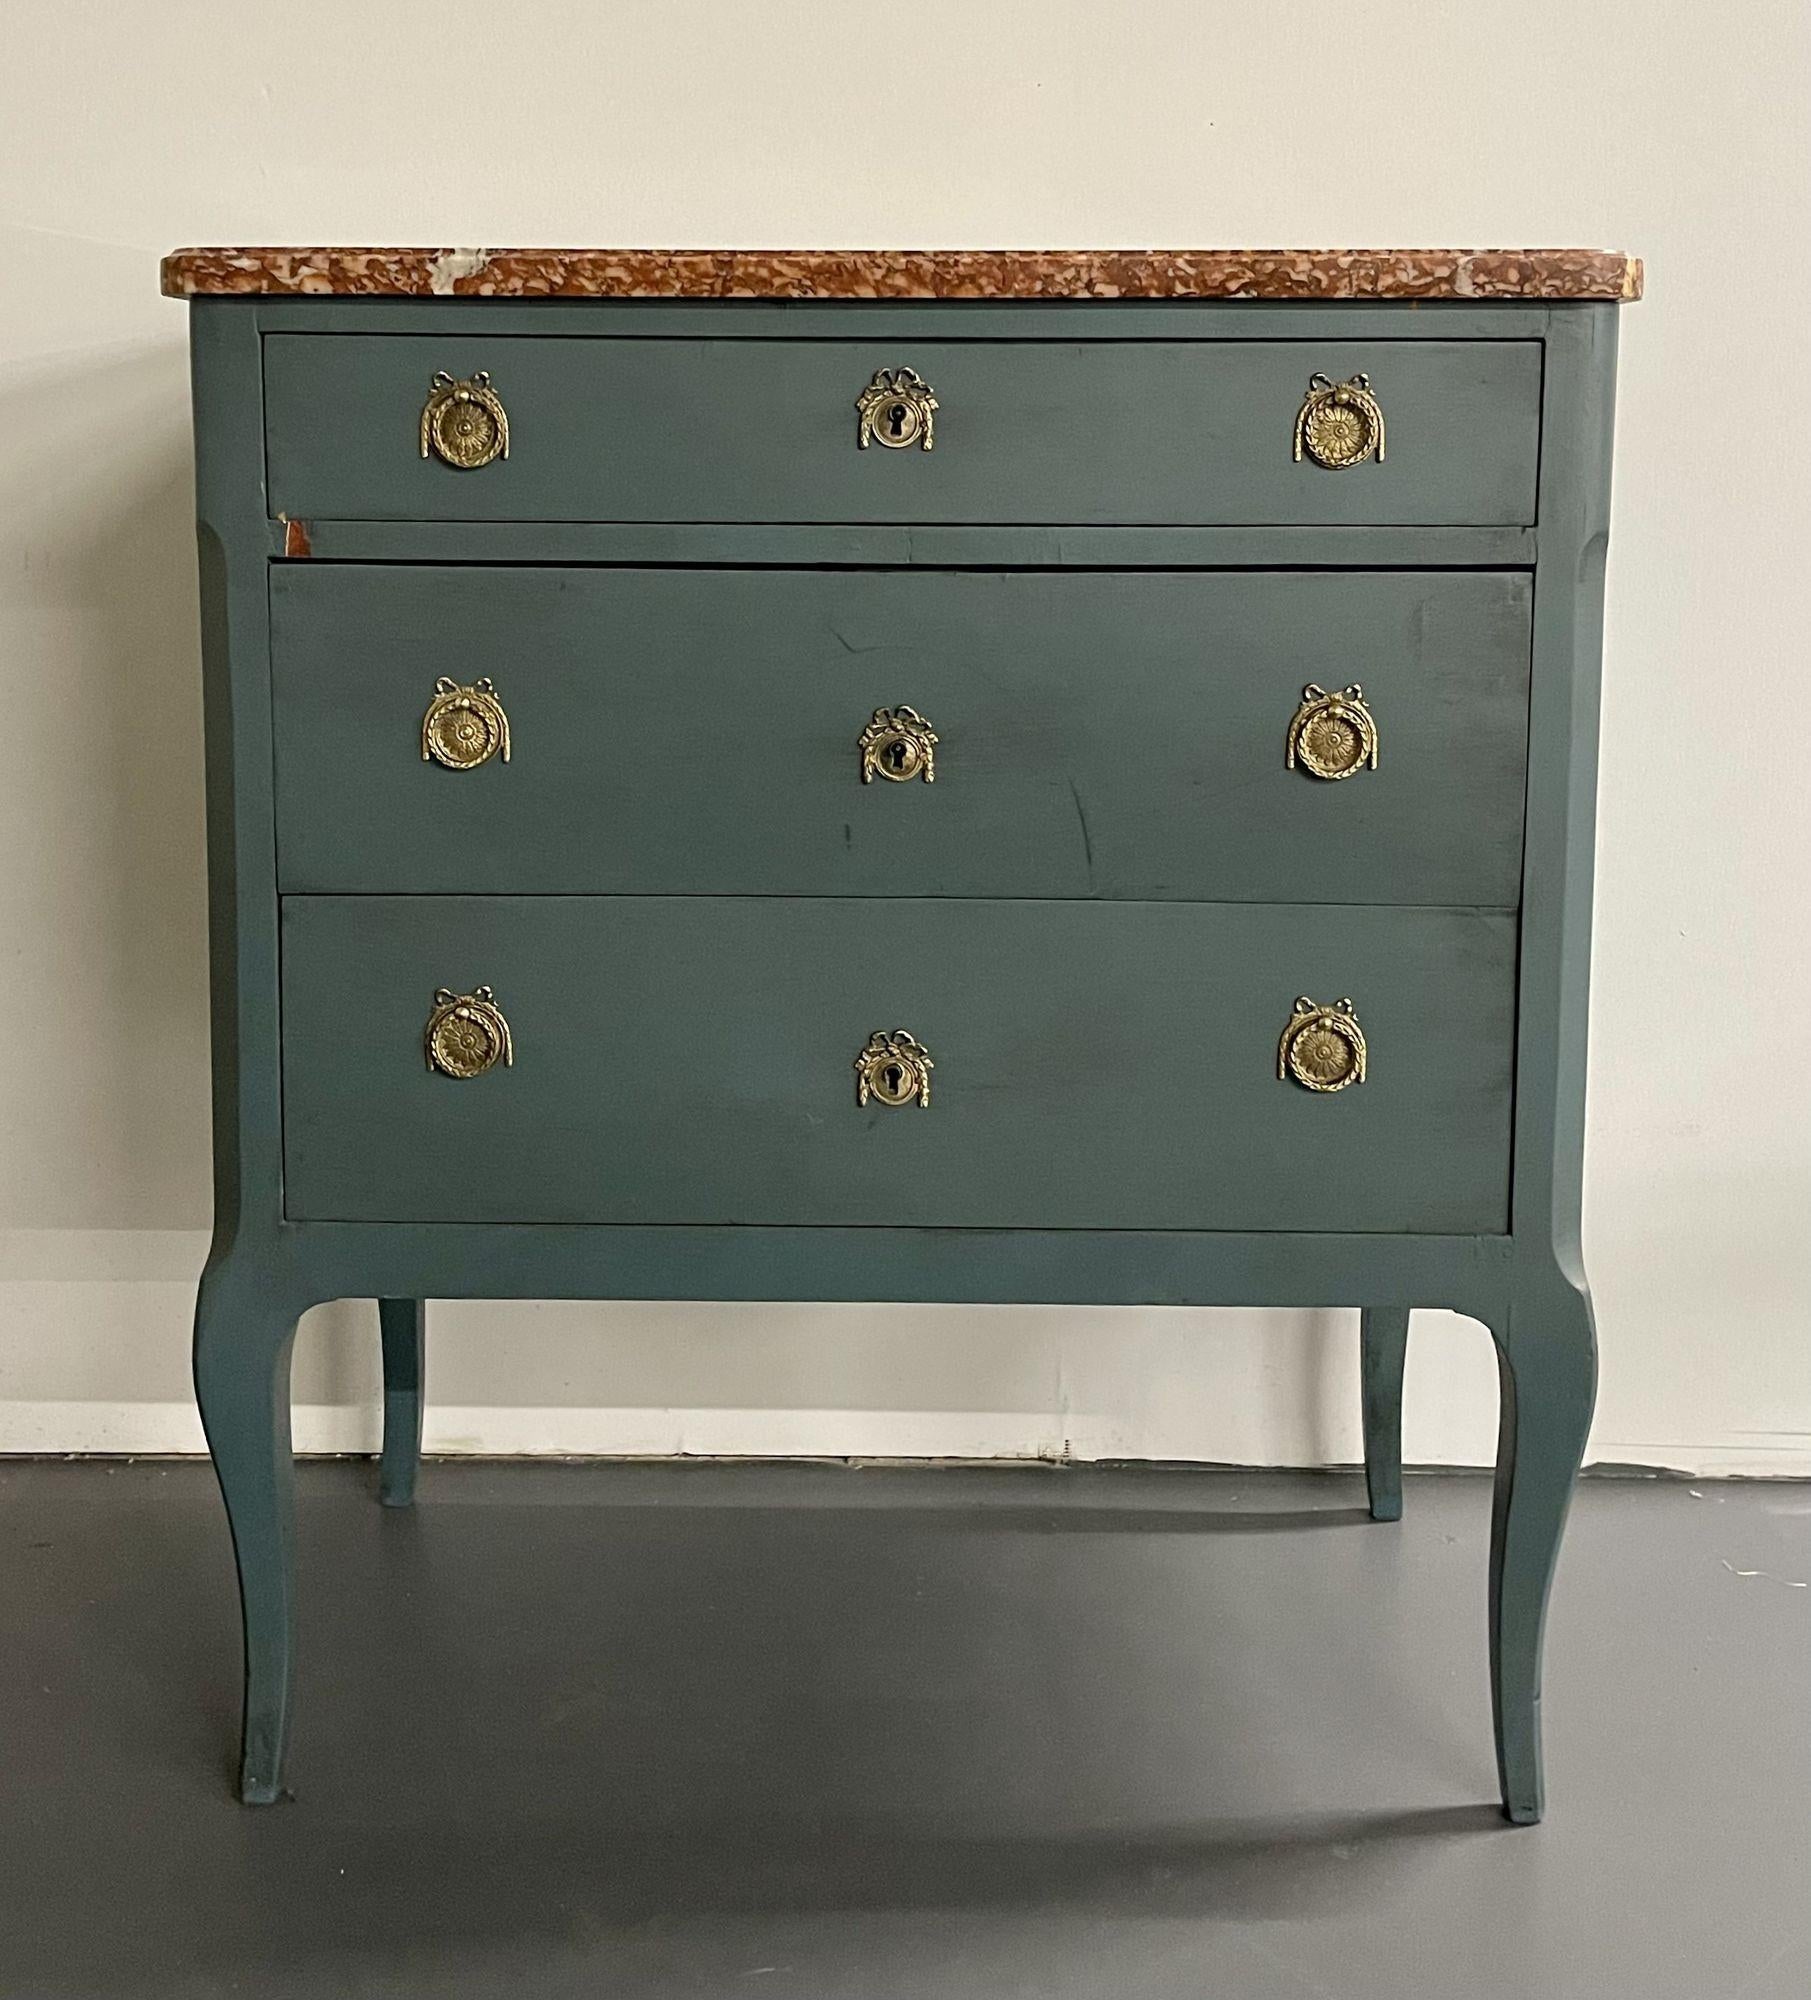 20th Century Gustavian Paint Decorated Swedish Chest / Dresser, Marble Top, Brass Accent